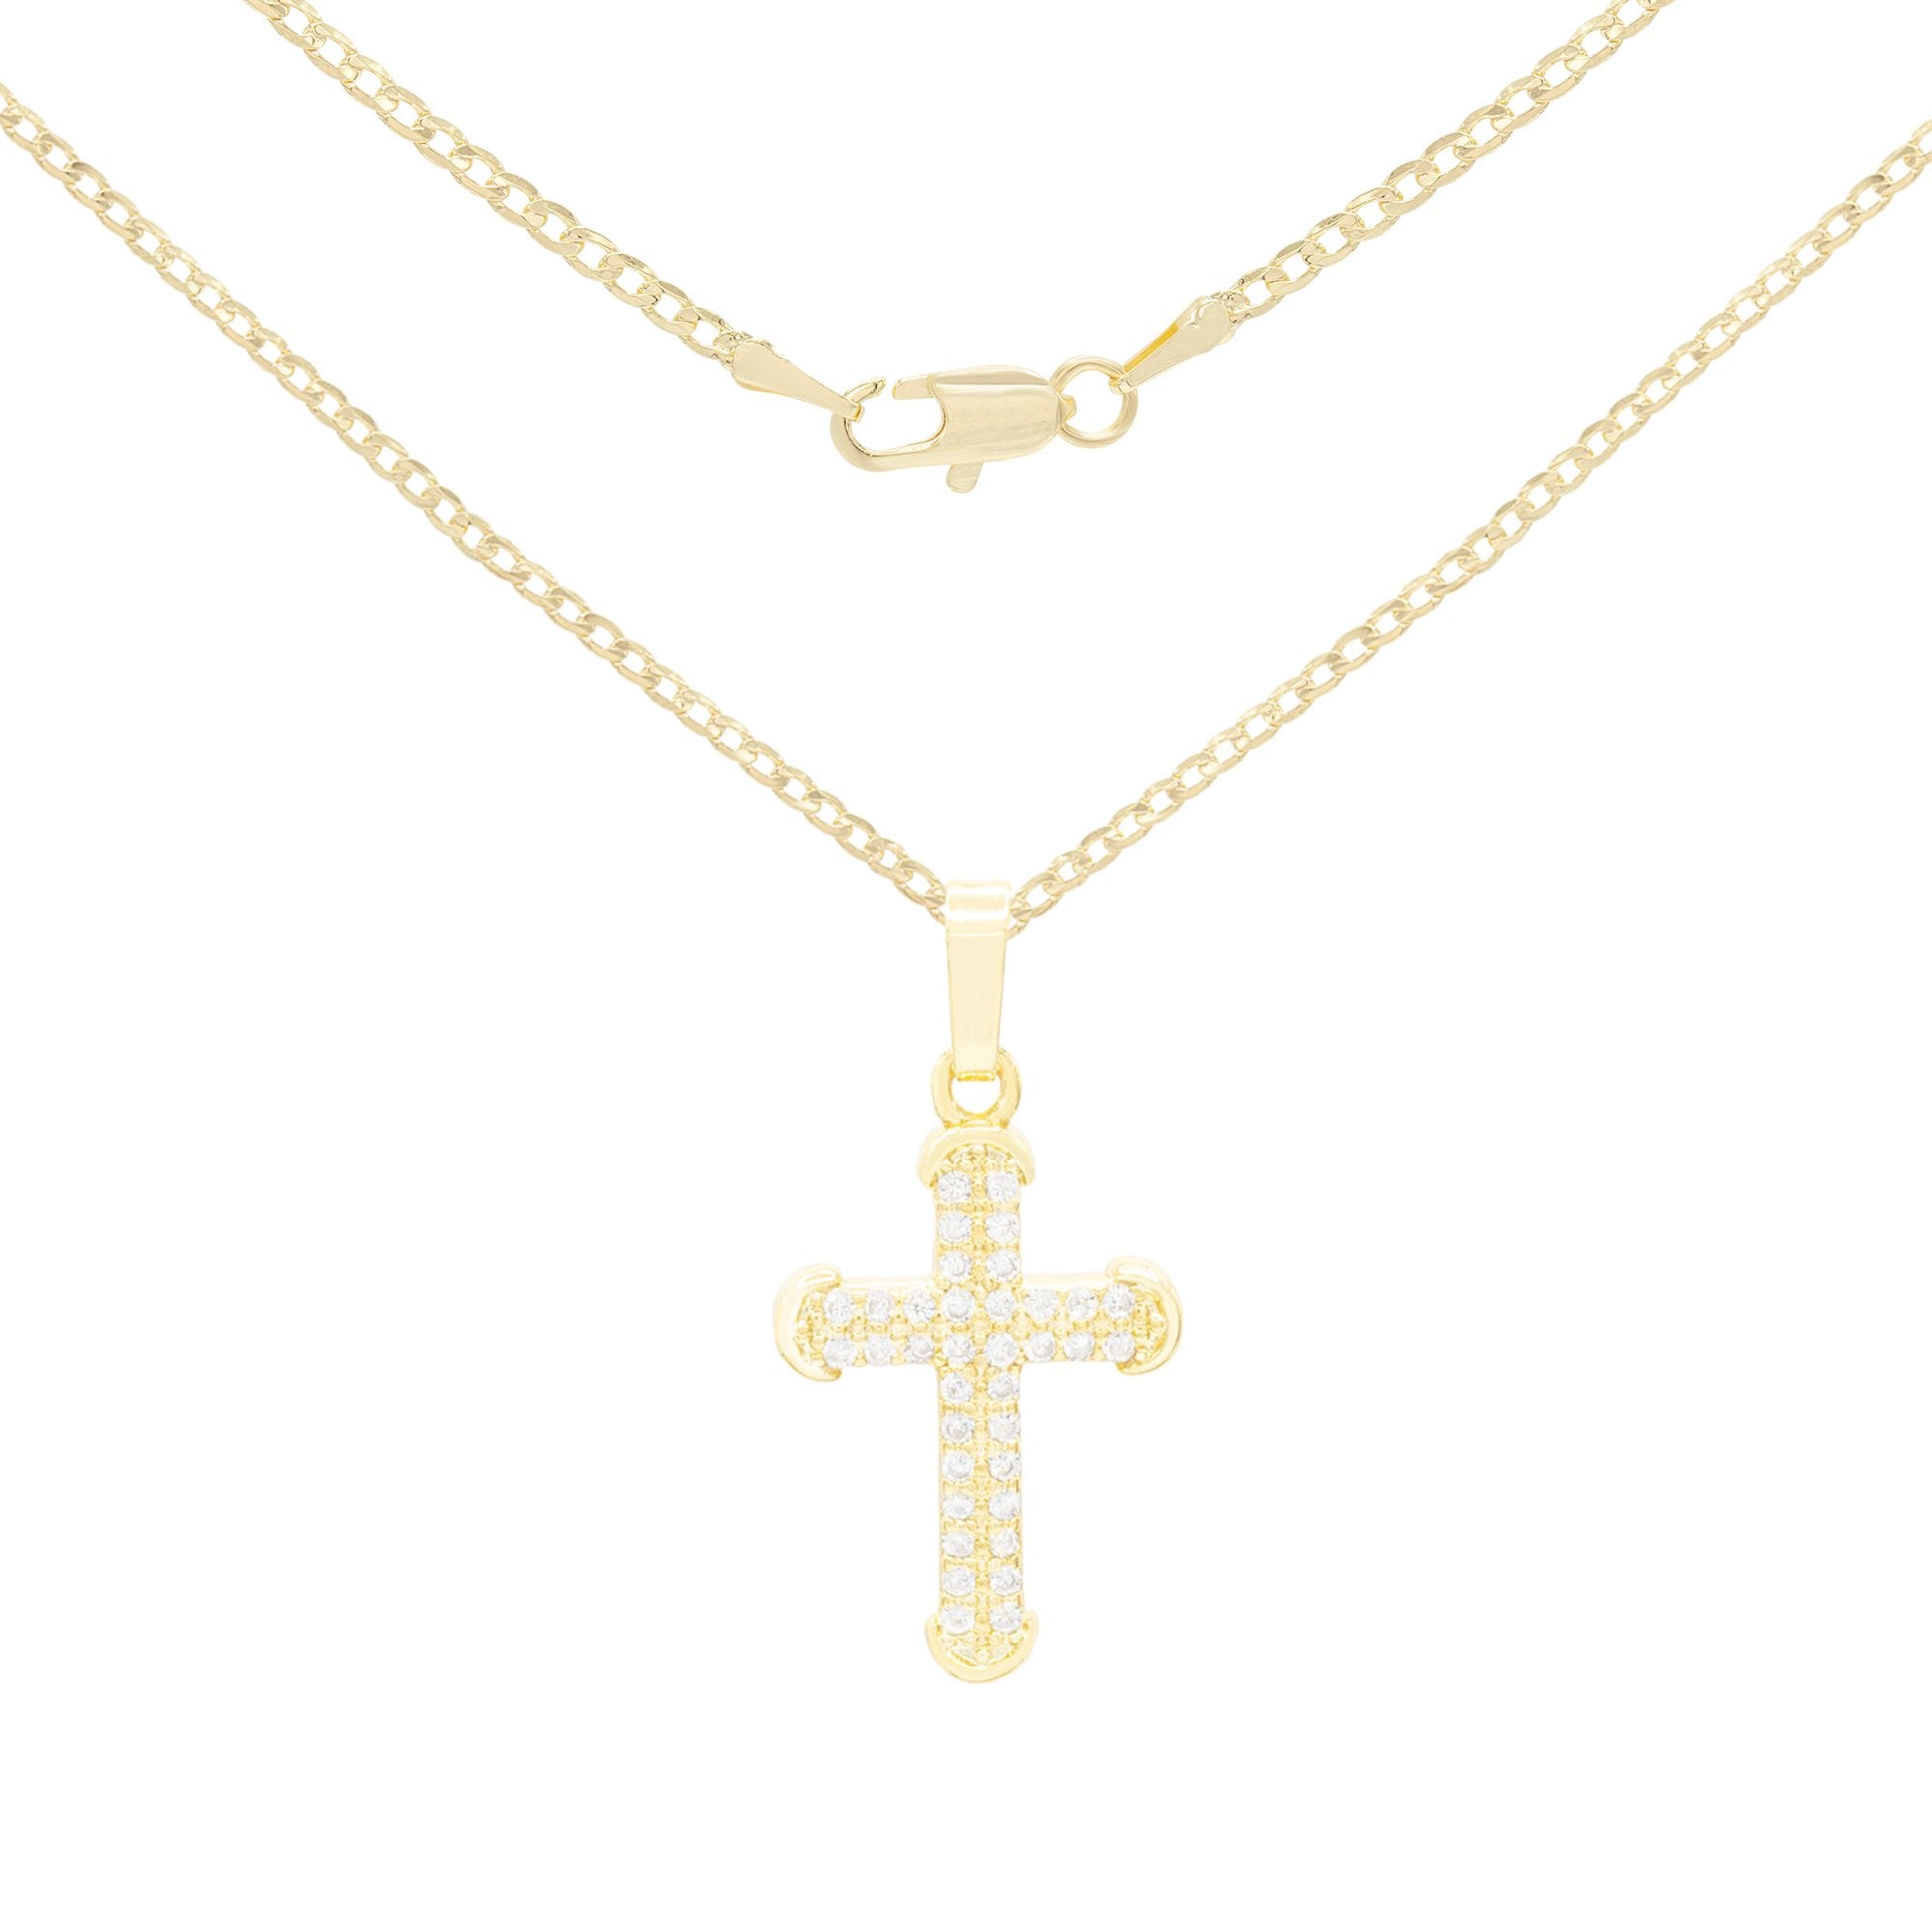 CZ Stone Accurate Cross Cubic Zirconia Pendant With Necklace Set 14K Gold Filled